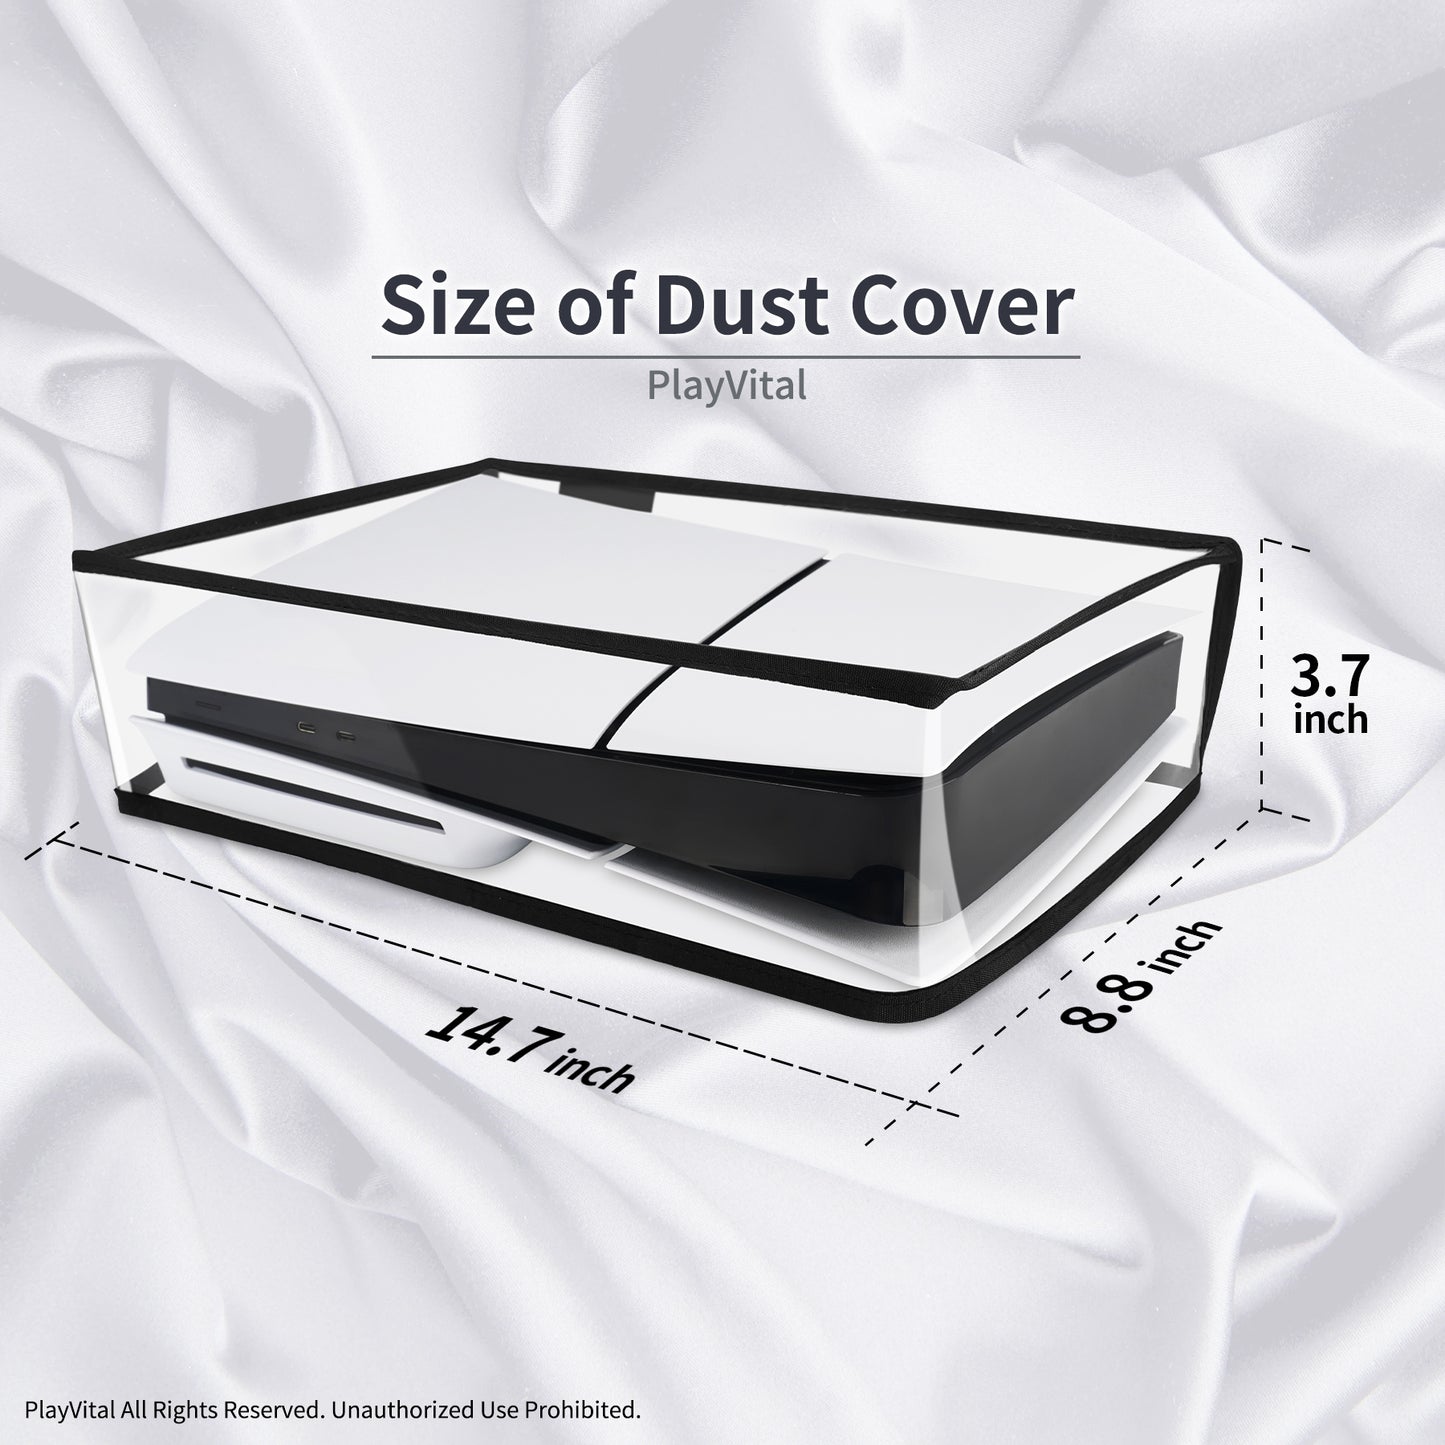 PlayVital Horizontal Dust Cover for ps5 Slim Disc Edition(The New Smaller Design), Transparent Dust Proof Protector Waterproof Cover Sleeve for ps5 Slim Console - HUYPFM003 PlayVital